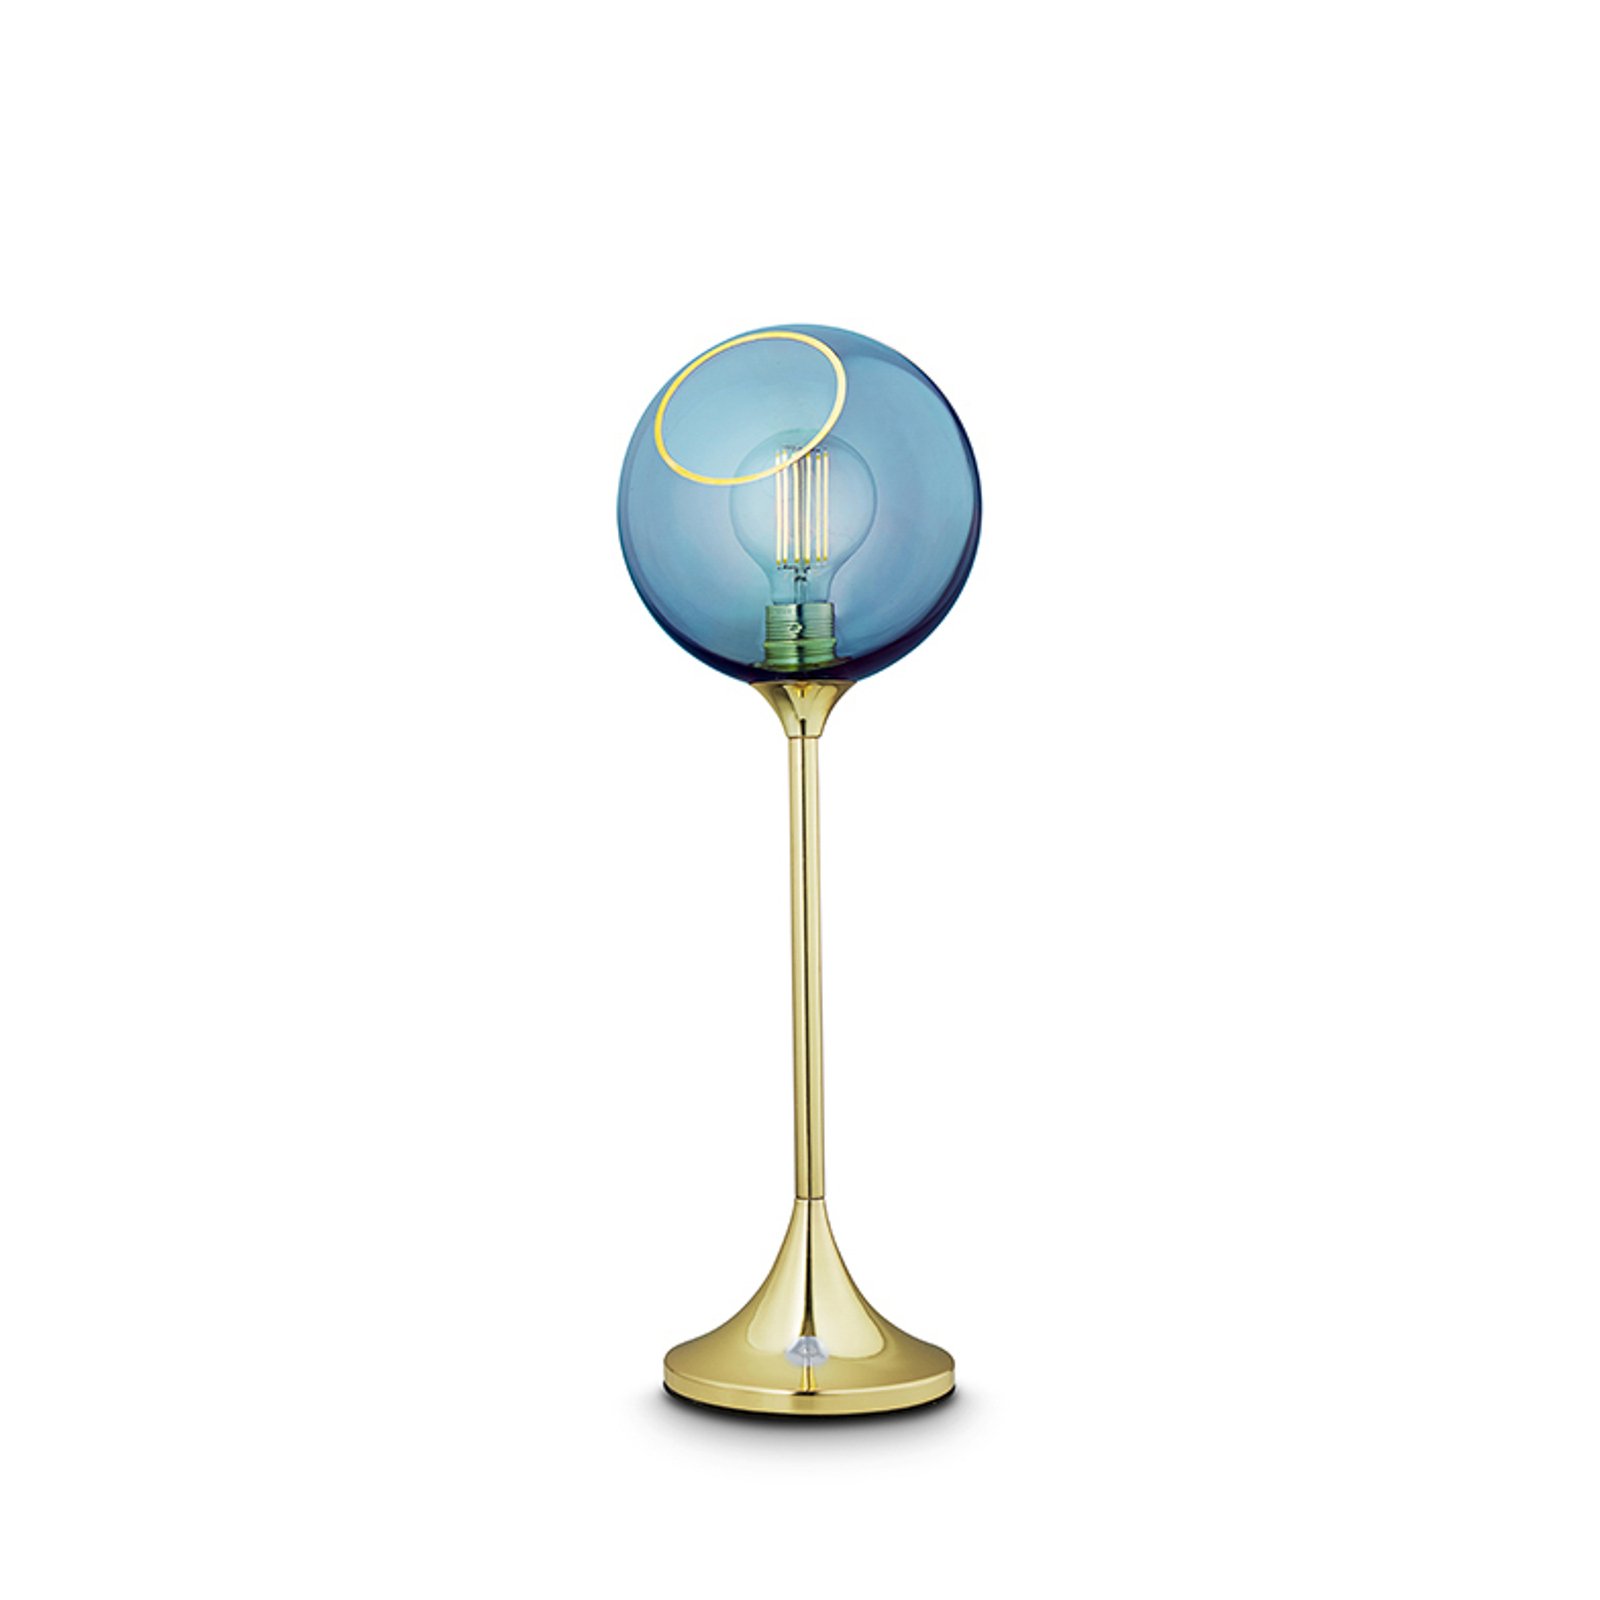 Ballroom table lamp, blue, glass, hand-blown, dimmable